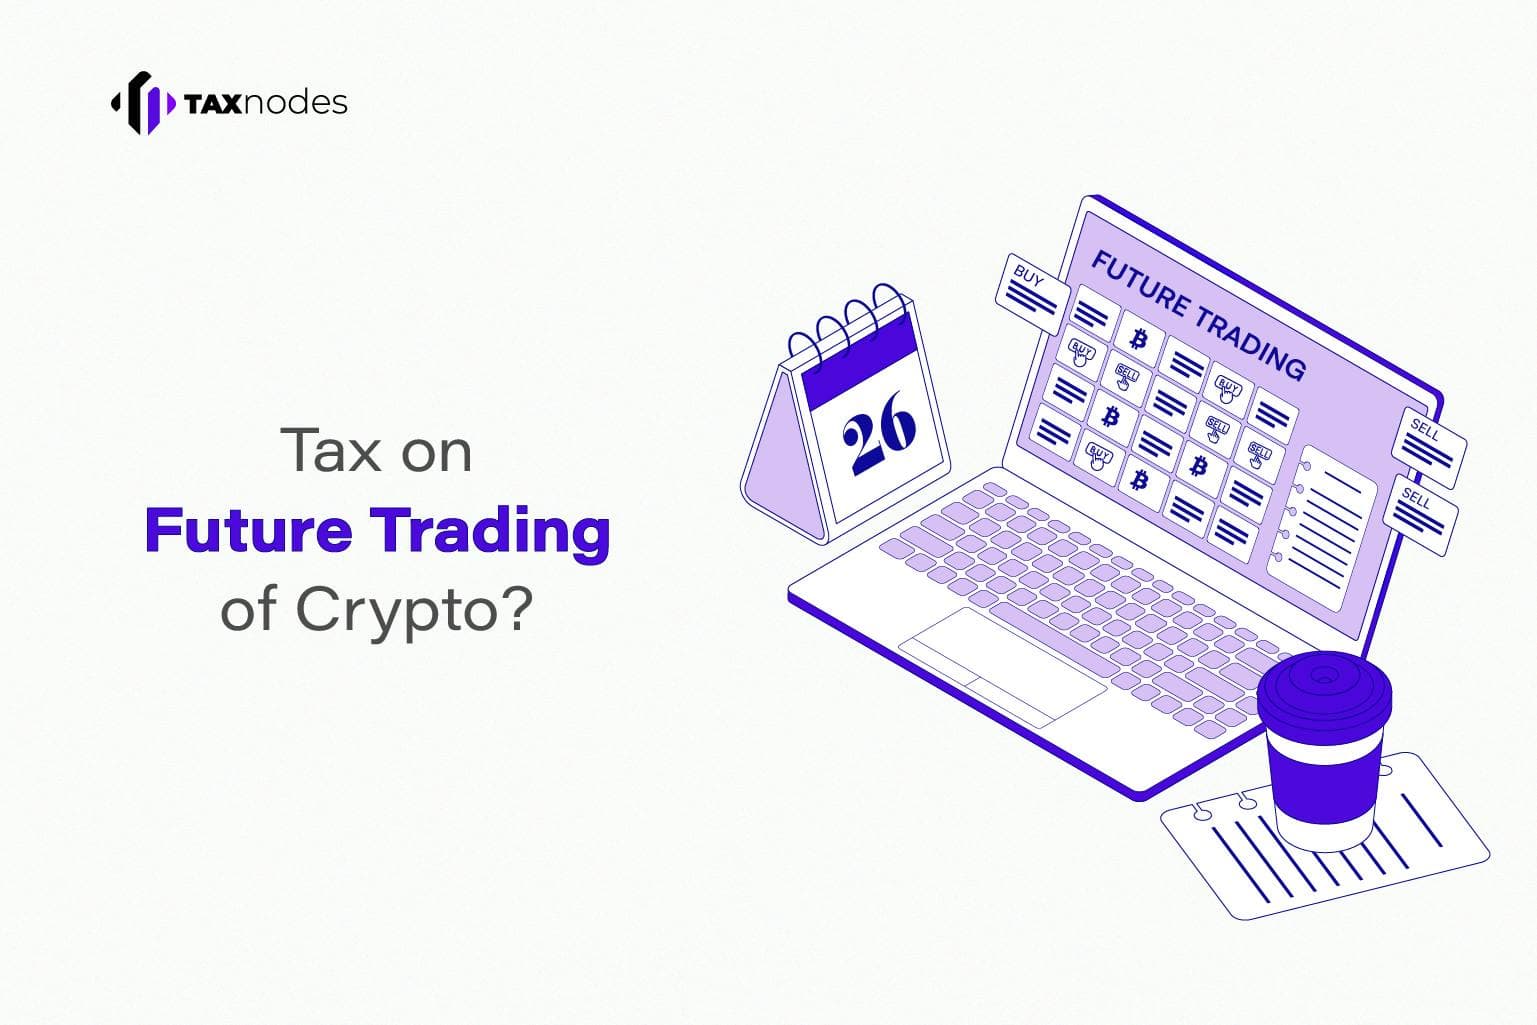 Is Crypto Tax Applicable for Future Trading of Crypto in India?